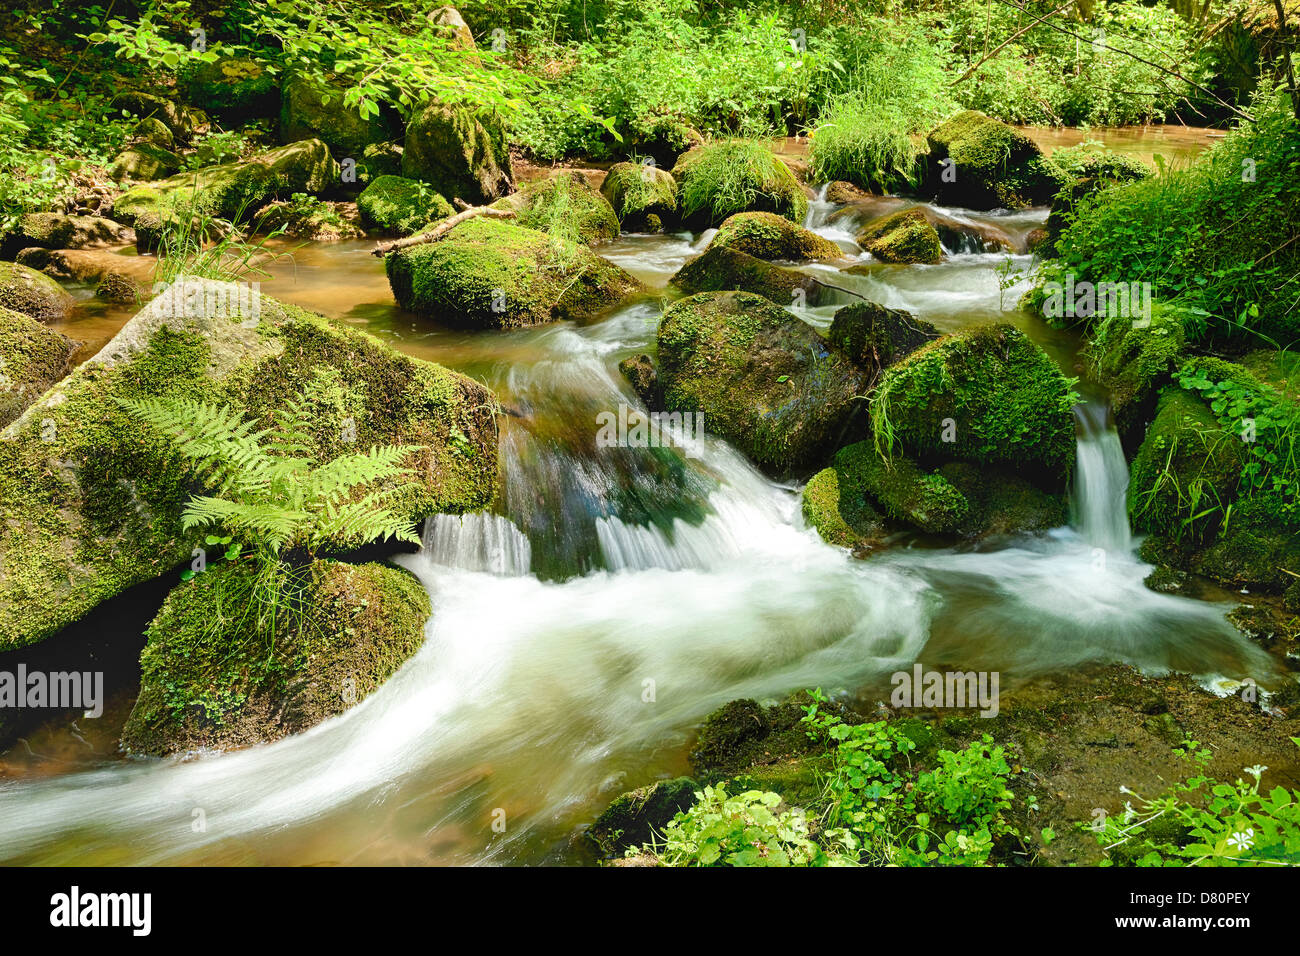 The river runs over boulders in the primeval forest - HDR Stock Photo